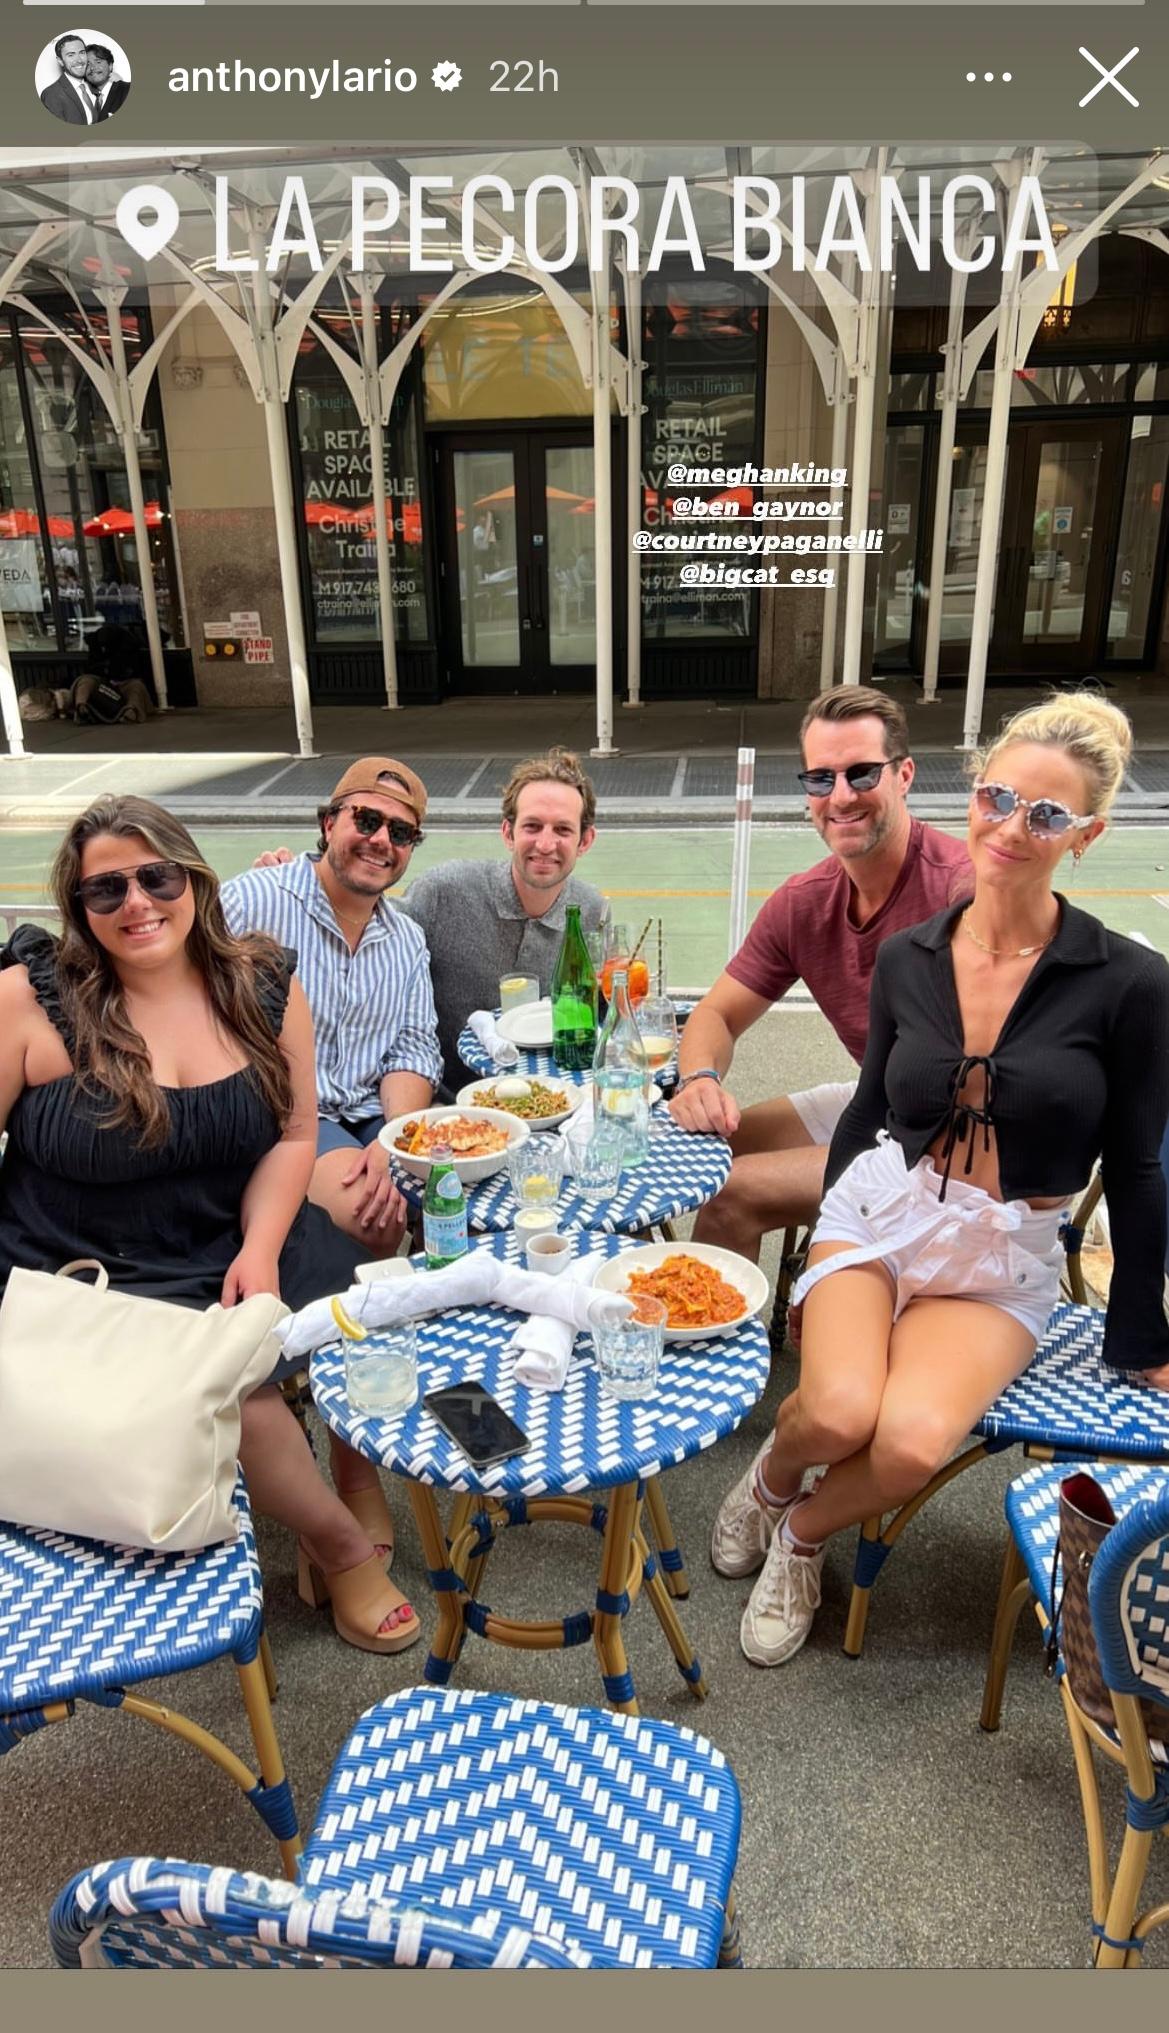 Meghan King seen with her literary agent Courtney Paganelli, publicist Anthony Lario and manager Ben Gaynor amid romance rumors with her lawyer Andrew Felix